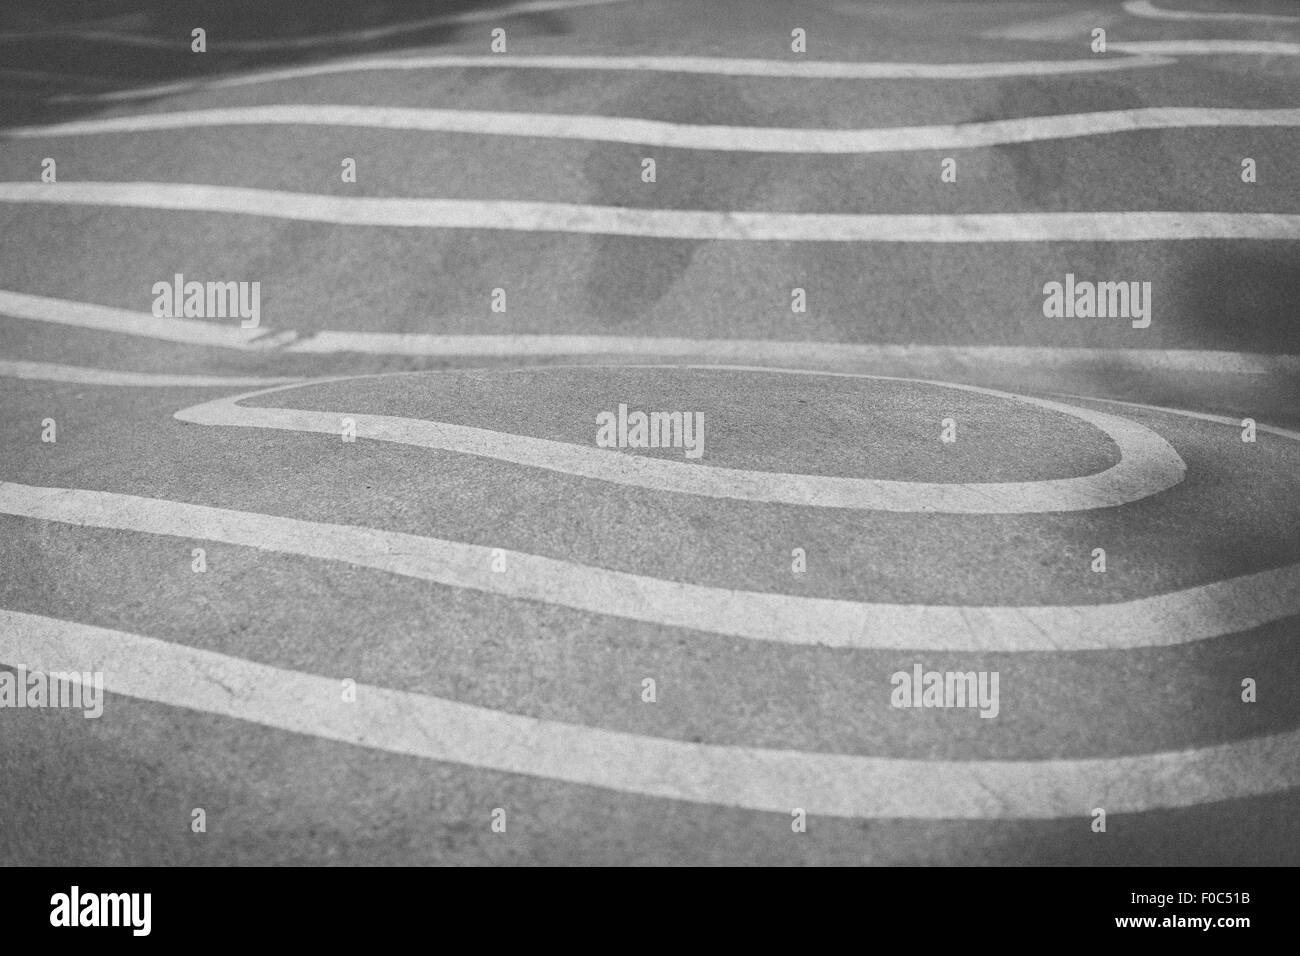 Markings Black and White Stock Photos & Images - Alamy